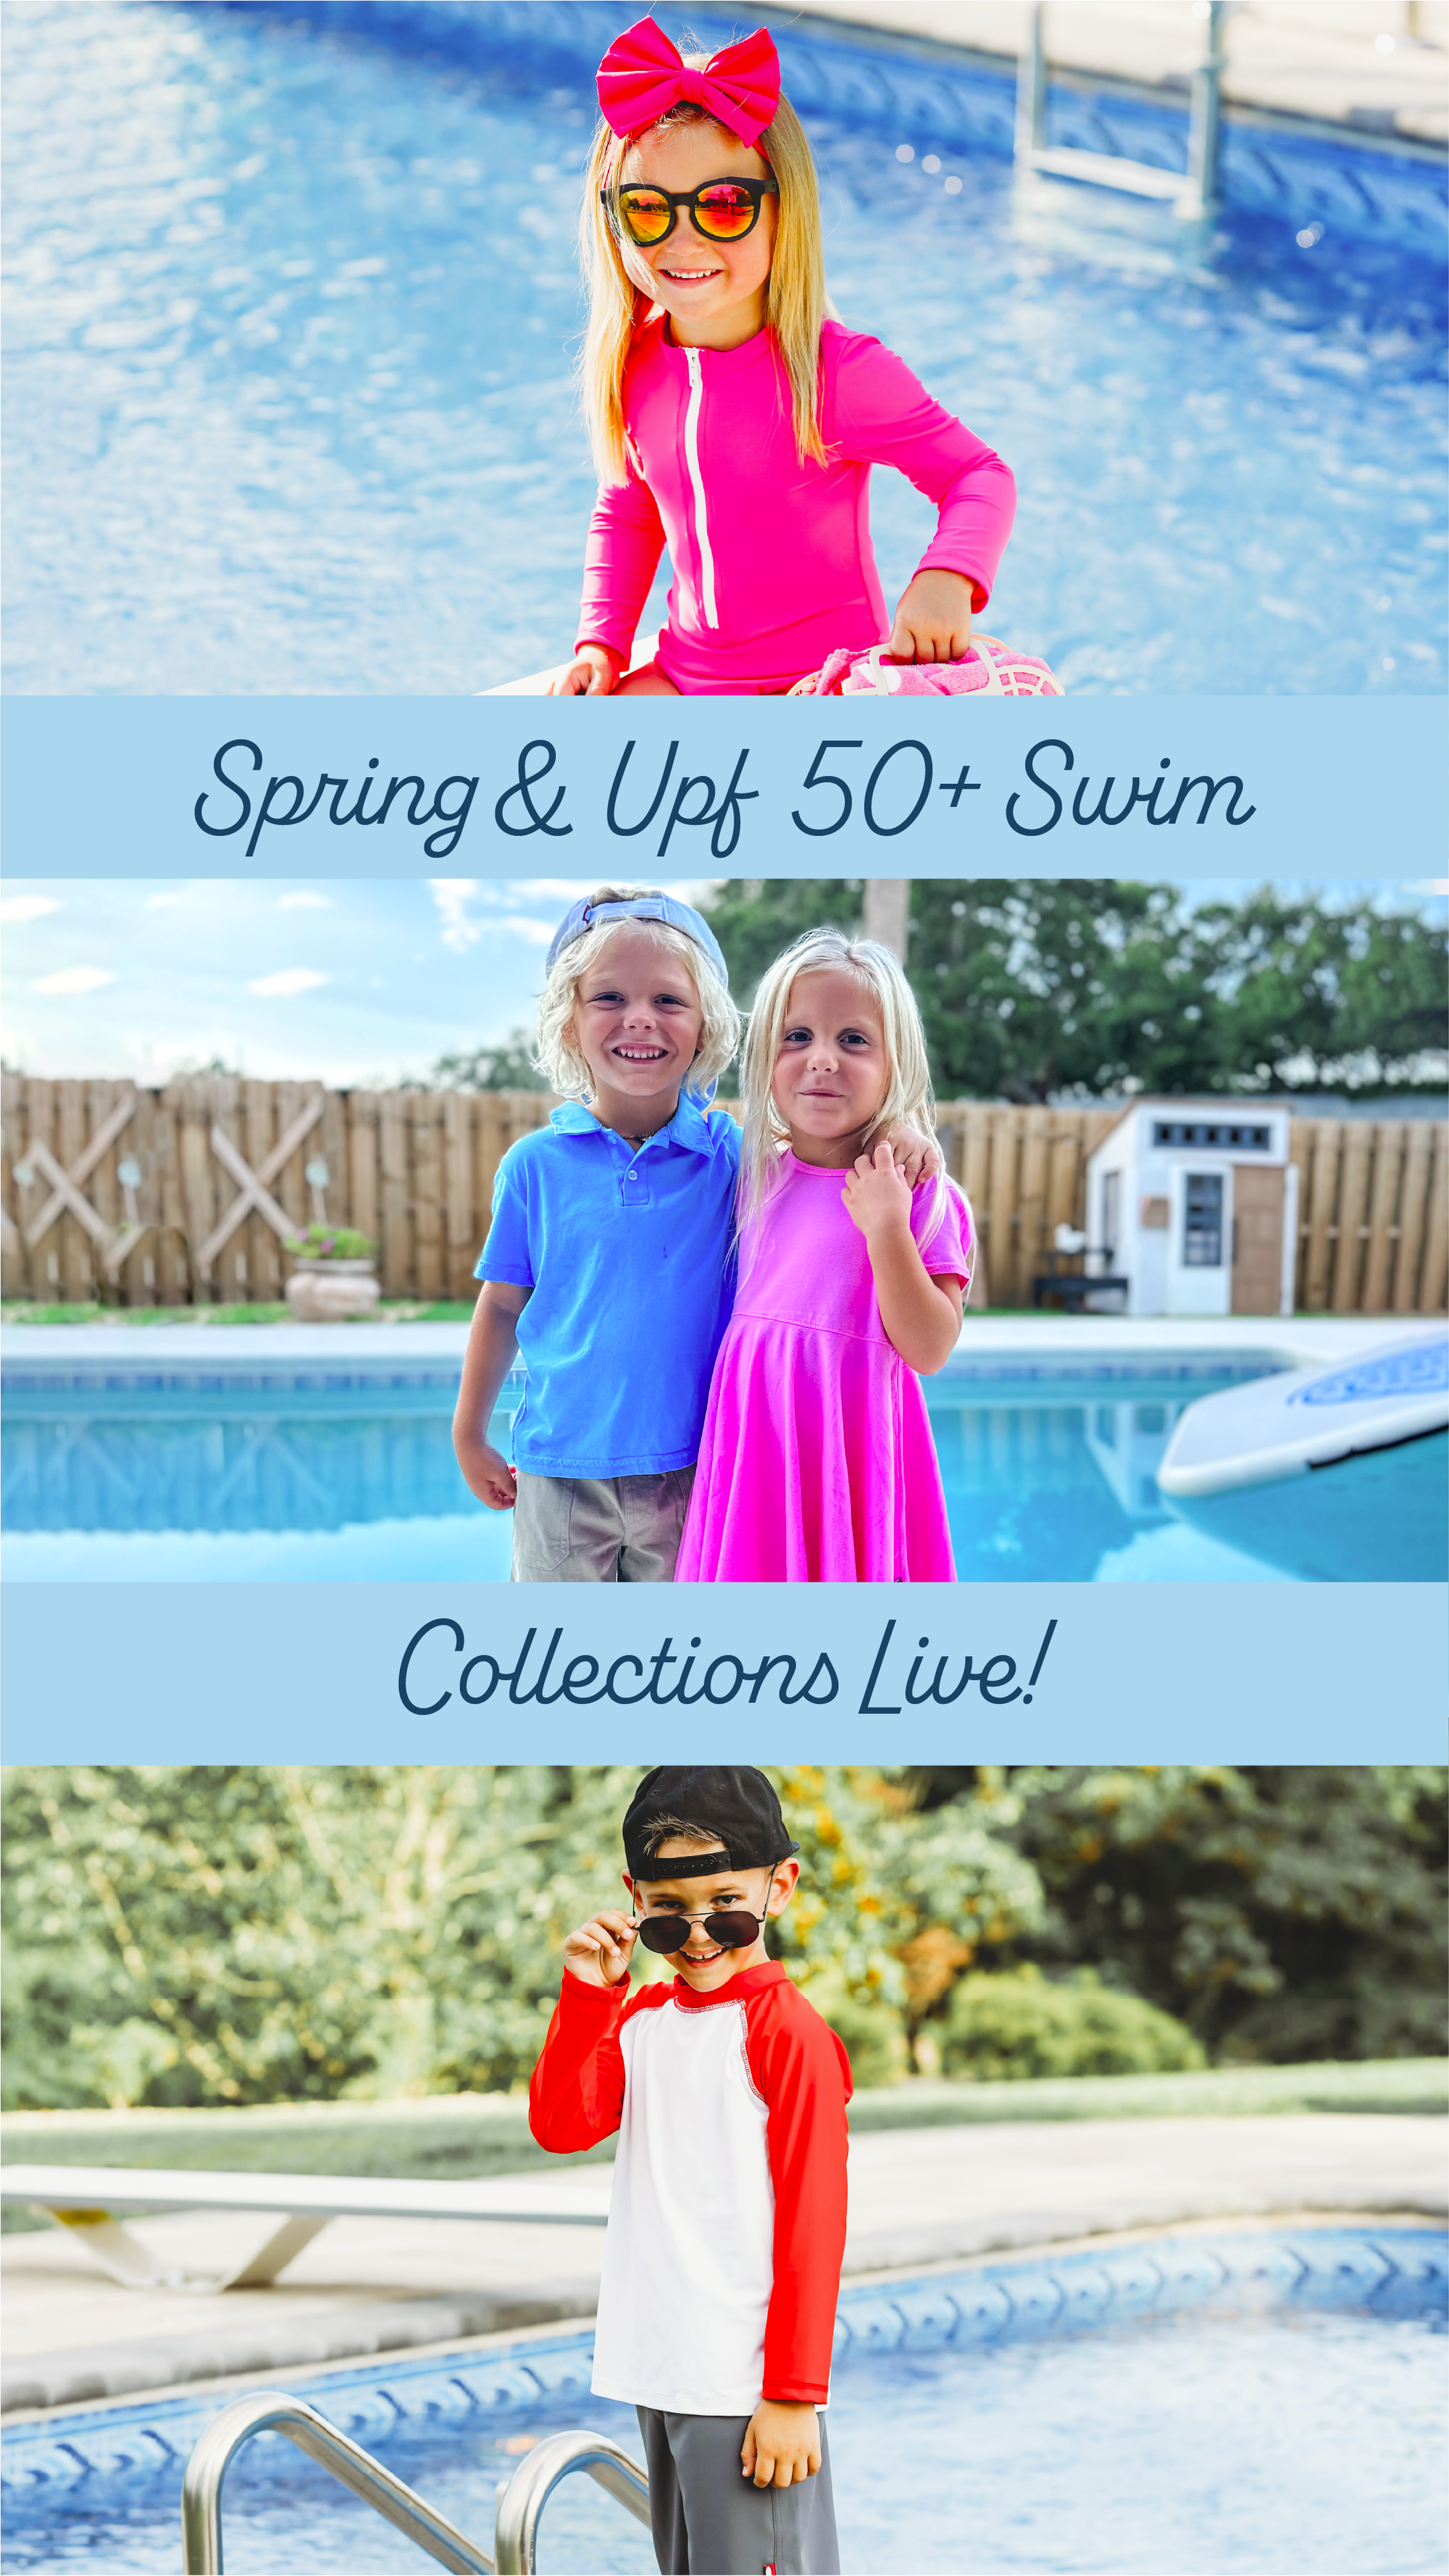 Kids standing by a pool wearing comfortable spring clothing and swimwear.